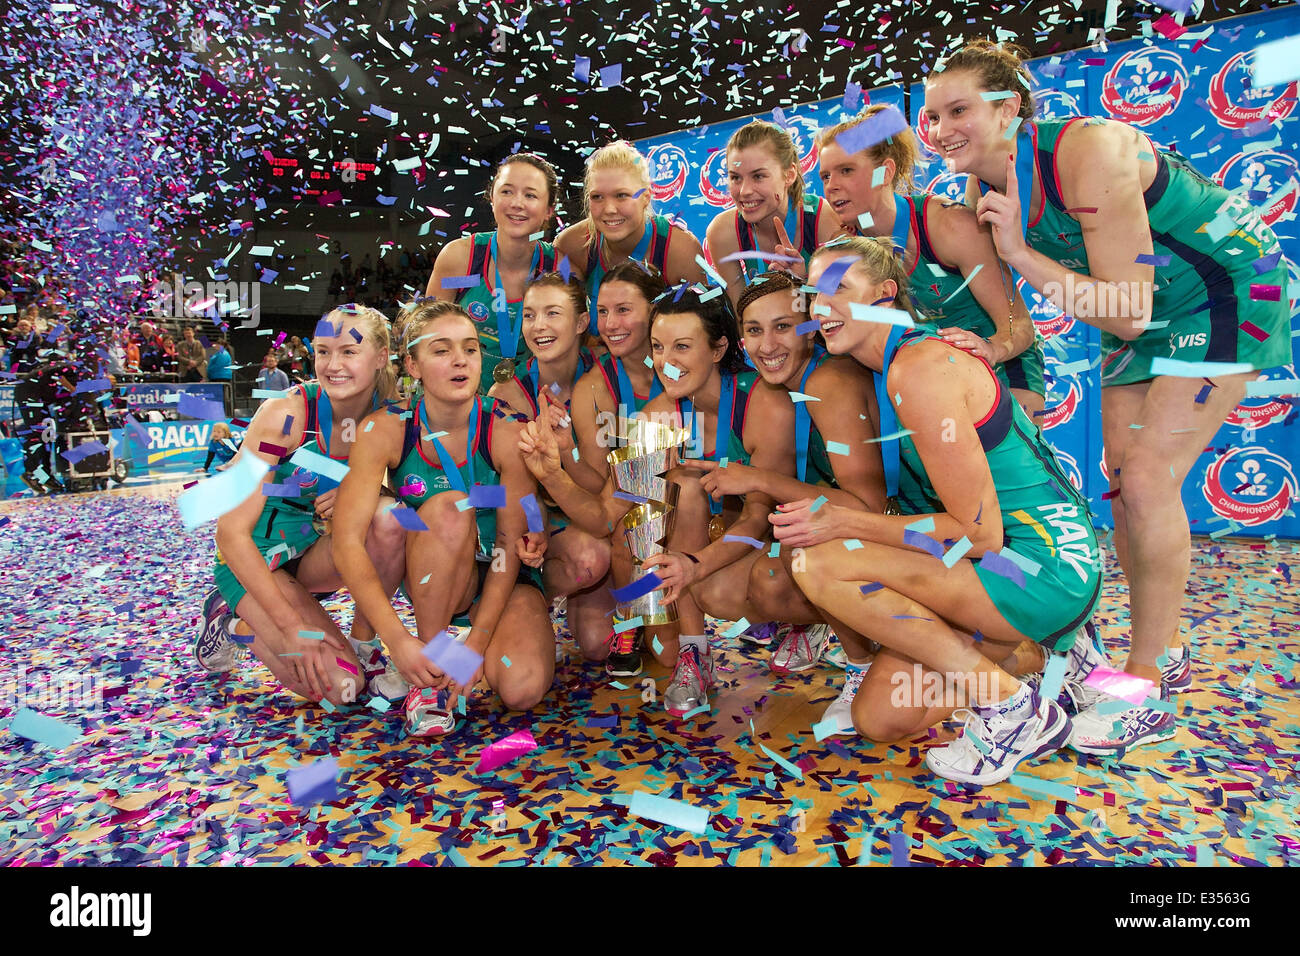 Melbourne, Victoria, Australia. 22nd June, 2014. Melbourne Vixens celebrate after winning the 2014 ANZ Netball Grand Final during the match between the Melbourne Vixens and QLD Firebirds during the 2014 ANZ Championship Netball Grand Final at Hisense Arena. Credit:  Tom Griffiths/ZUMA Wire/ZUMAPRESS.com/Alamy Live News Stock Photo